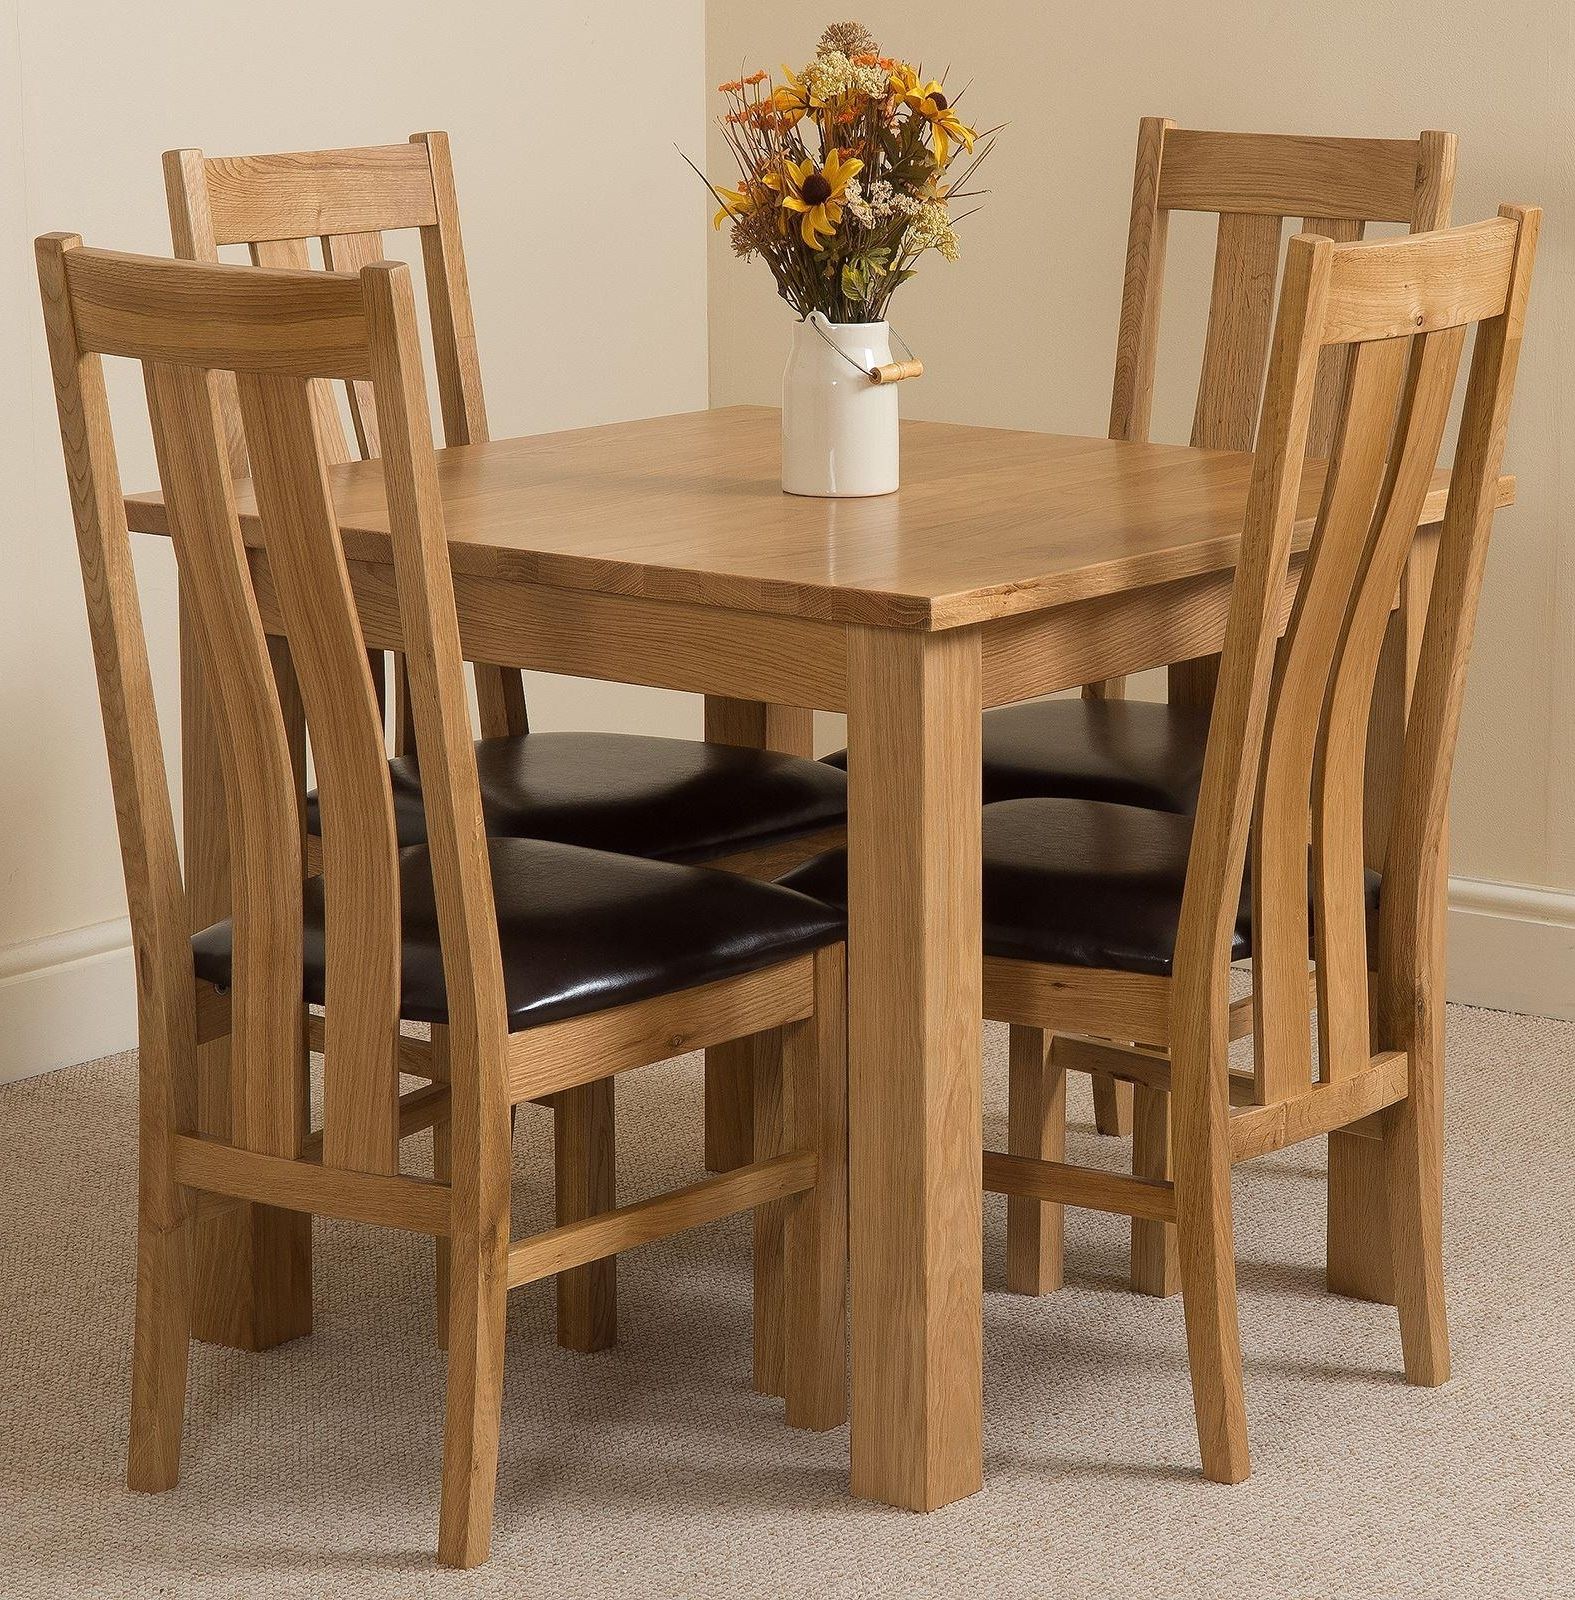 Oslo Solid Oak Dining Table And 4 Princeton Solid Oak Leather Chairs Pertaining To Famous Oak Dining Tables And Leather Chairs (View 21 of 25)